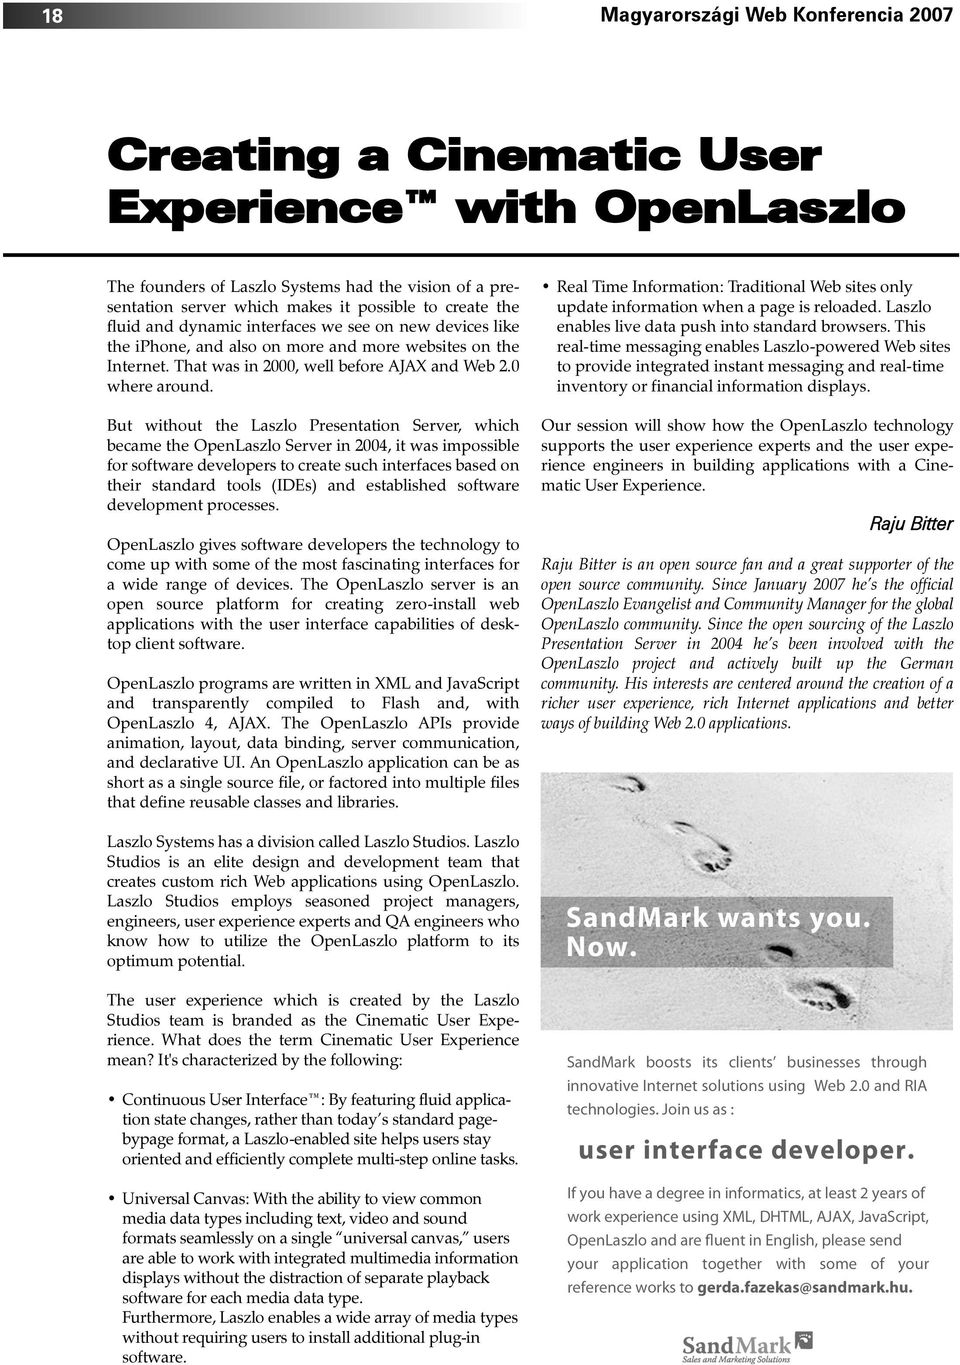 But without the Laszlo Presentation Server, which became the OpenLaszlo Server in 2004, it was impossible for software developers to create such interfaces based on their standard tools (IDEs) and